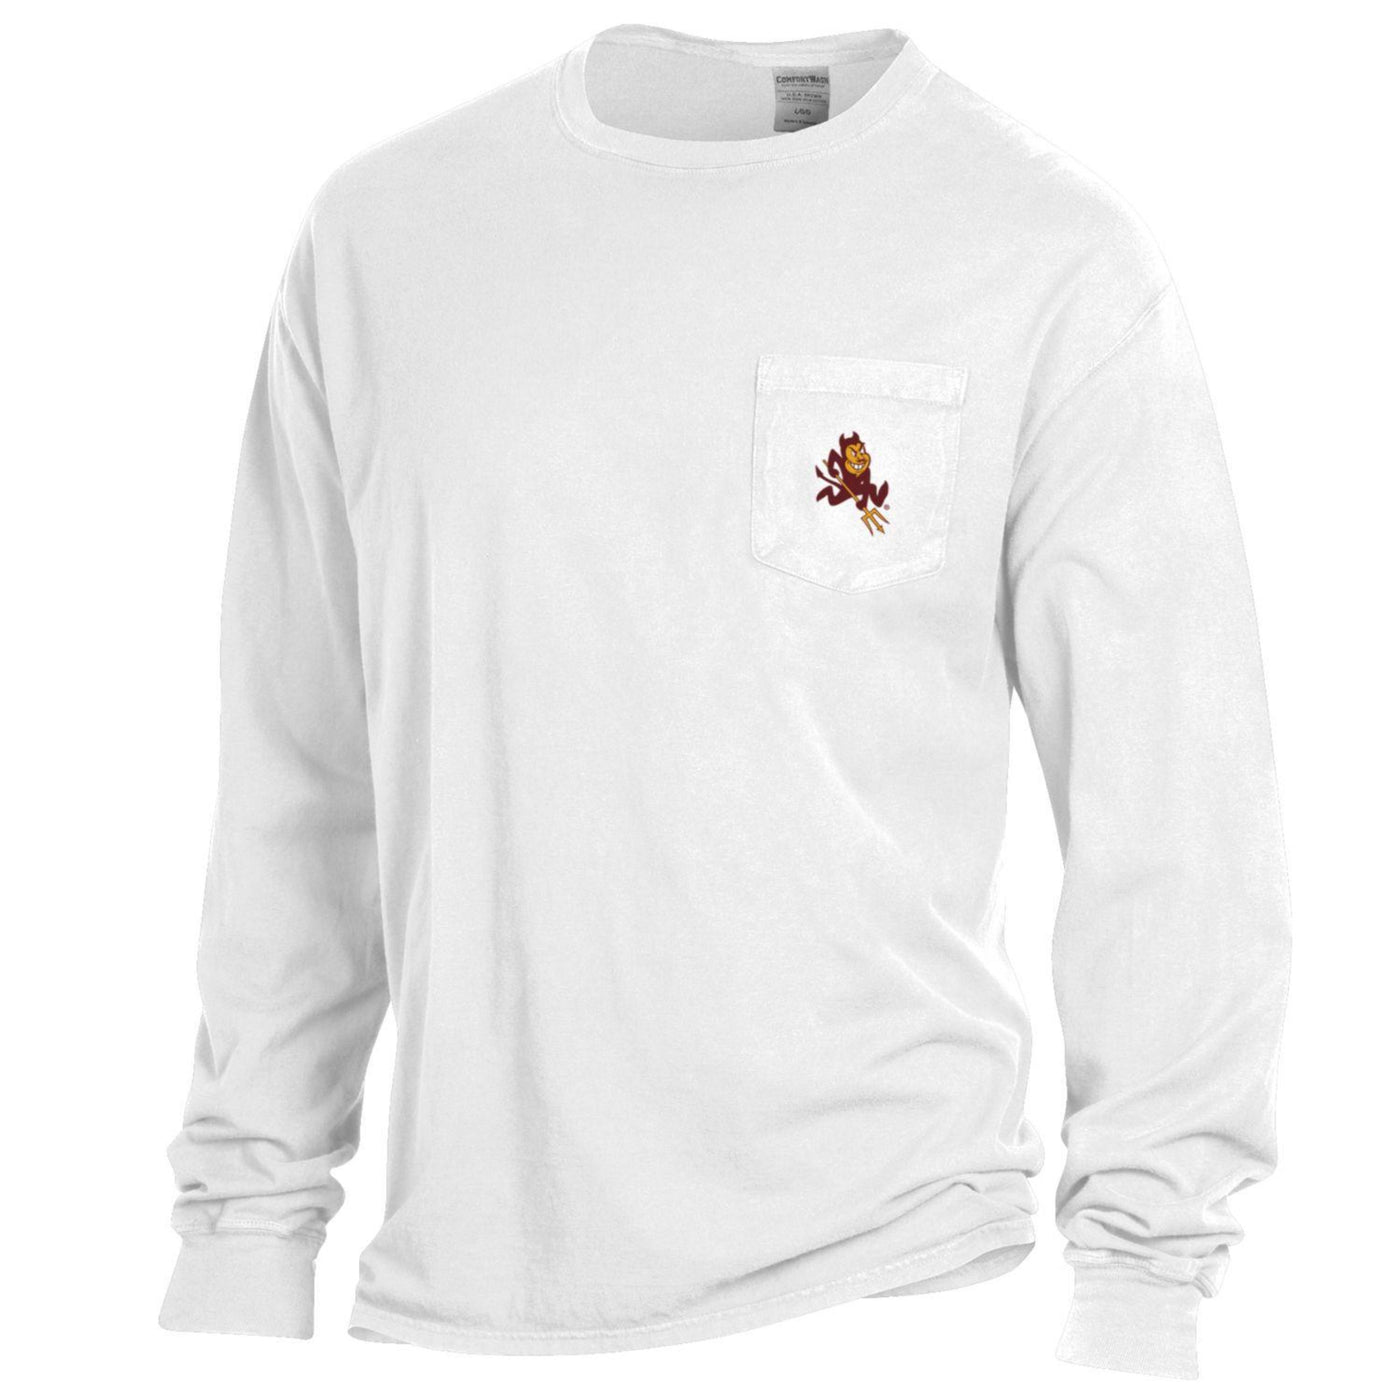 ASU white long sleeve with a pocket Sparky on it